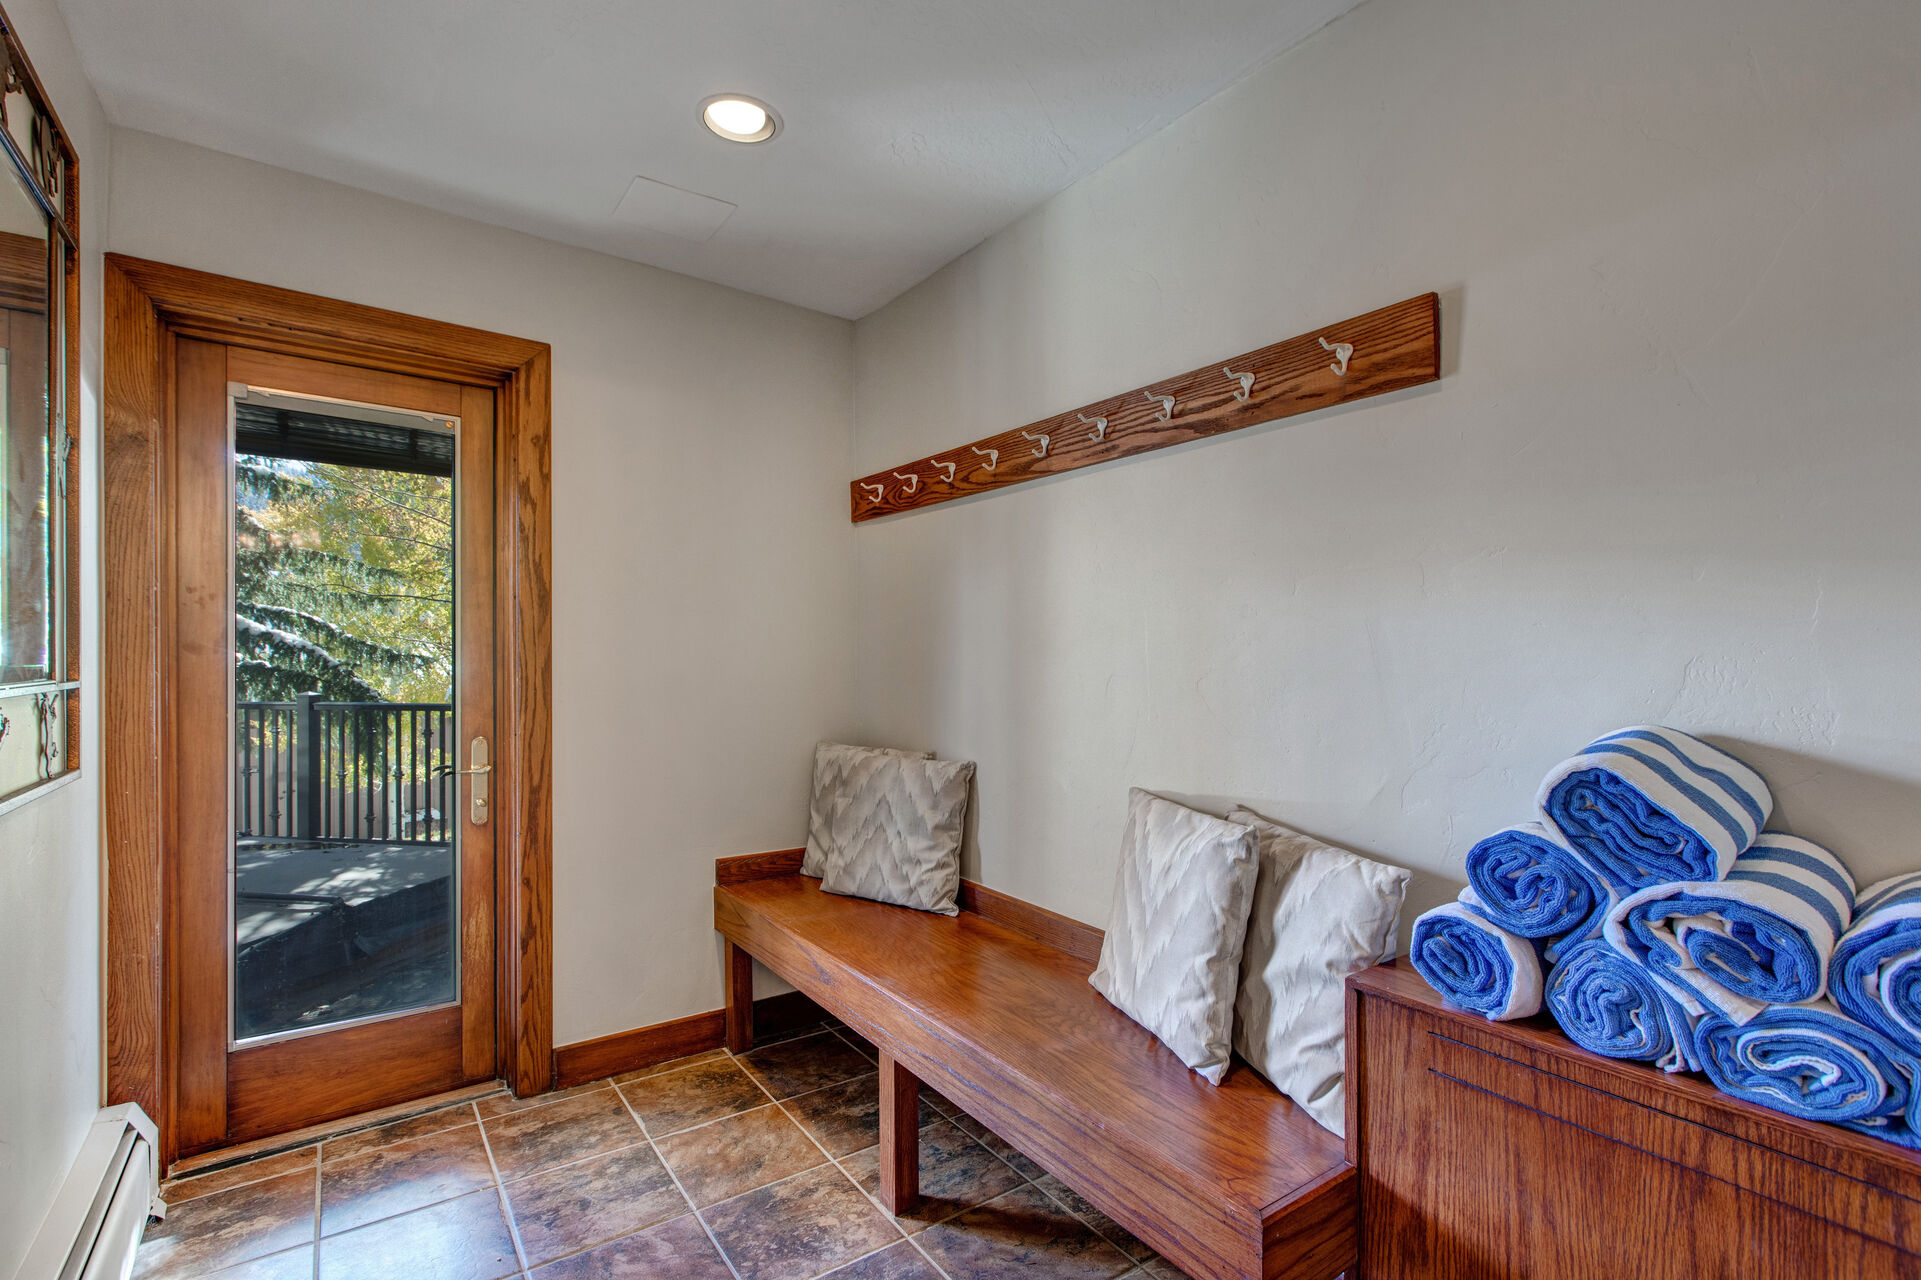 Lower Level mudroom with convenient bench and hooks as well as private hot tub patio access